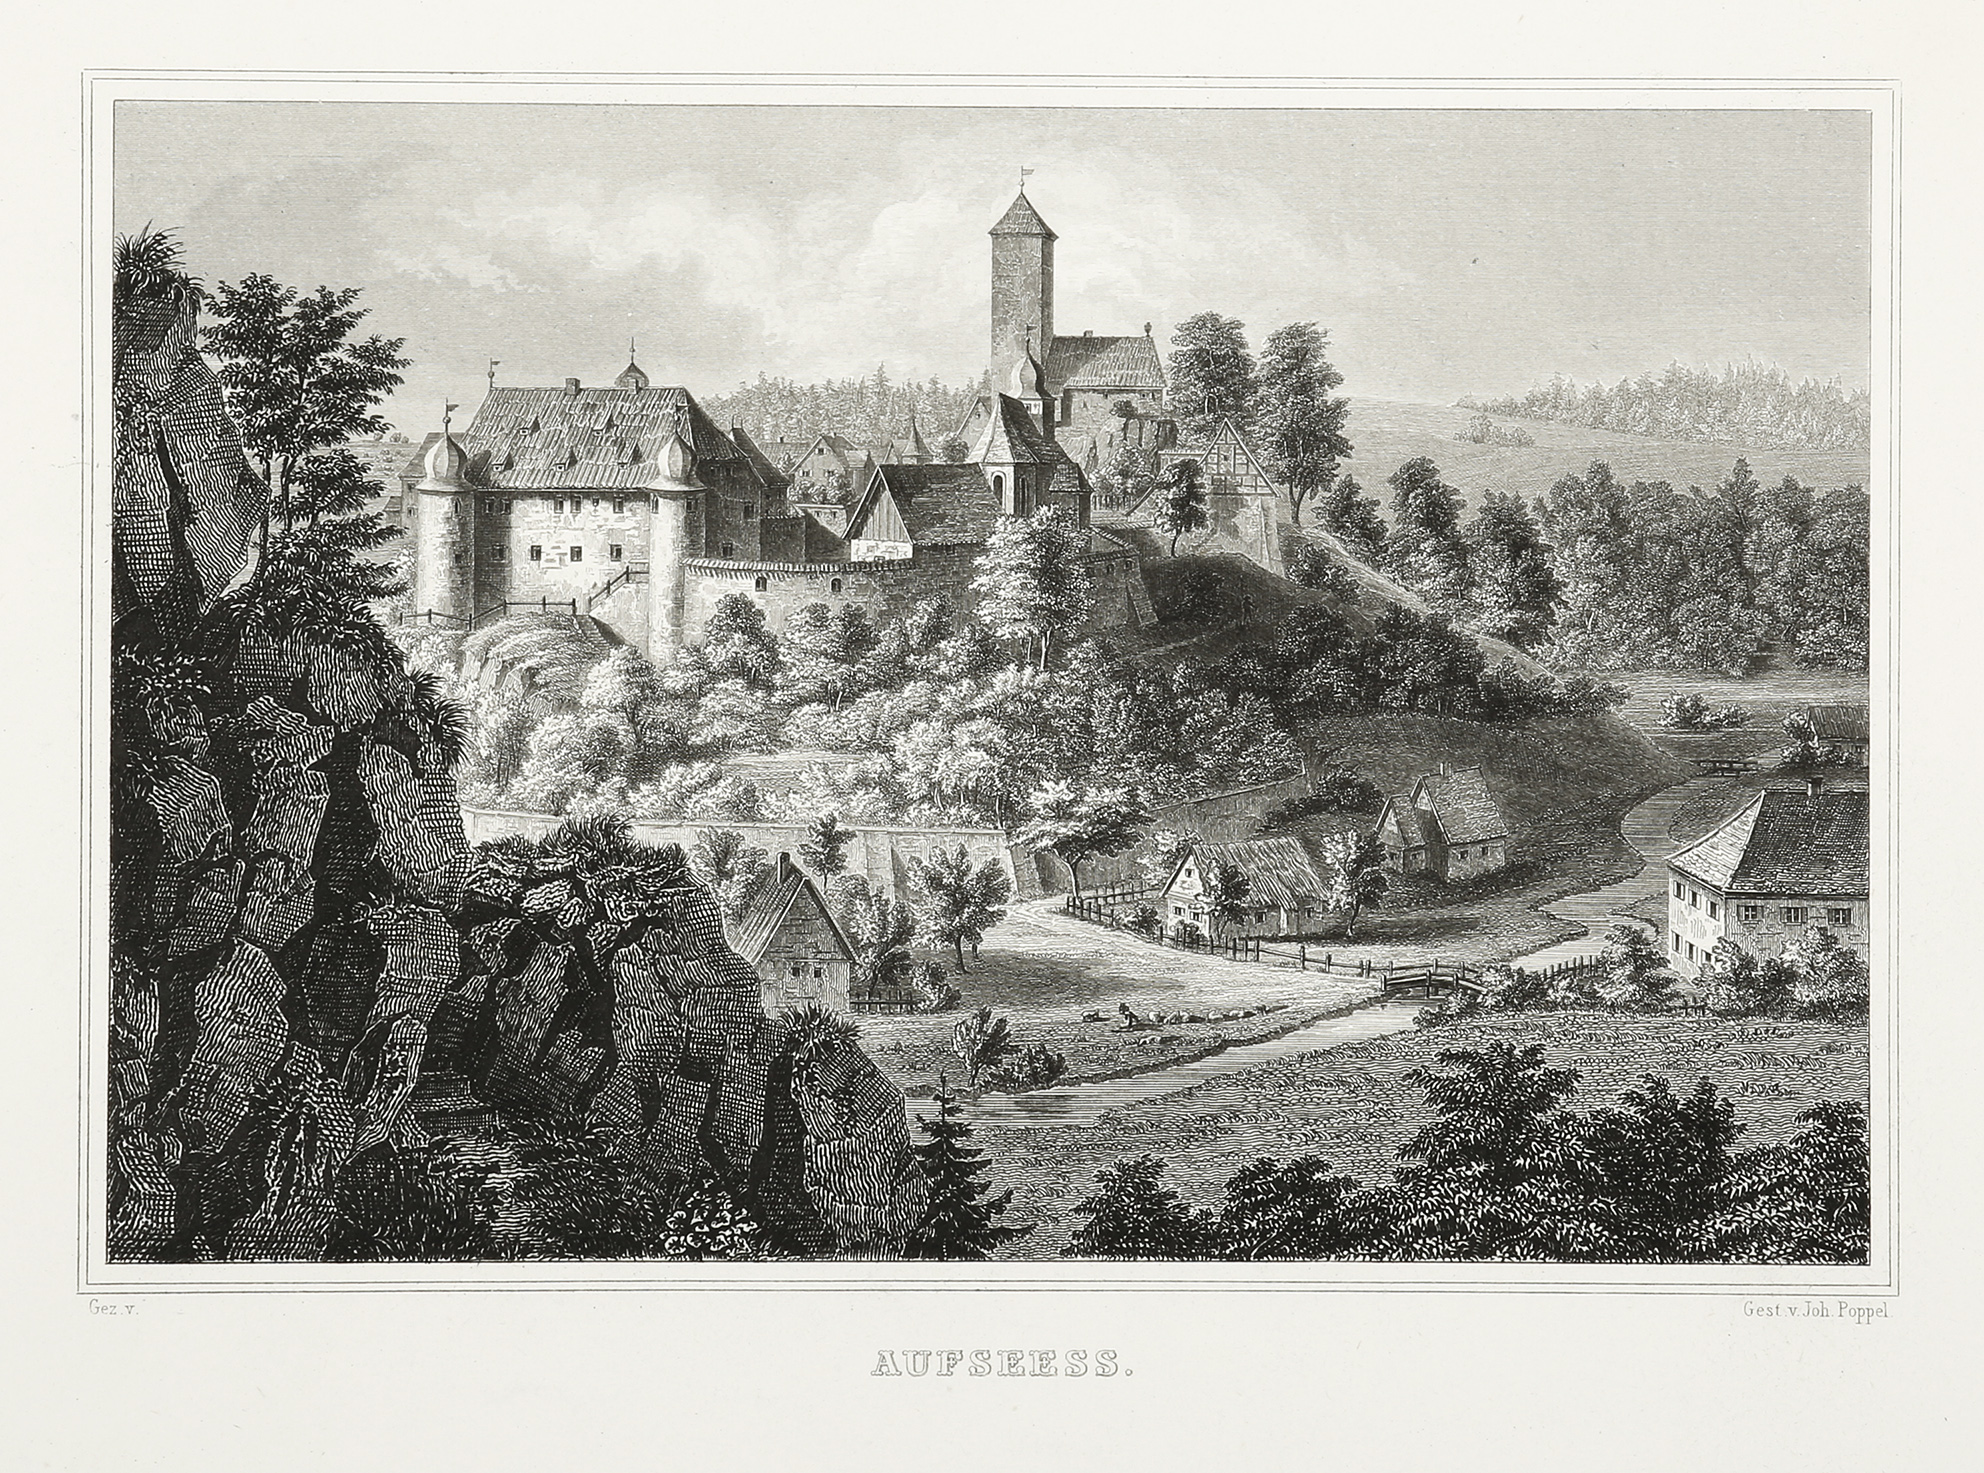 Aufseess - Antique Print from 1850